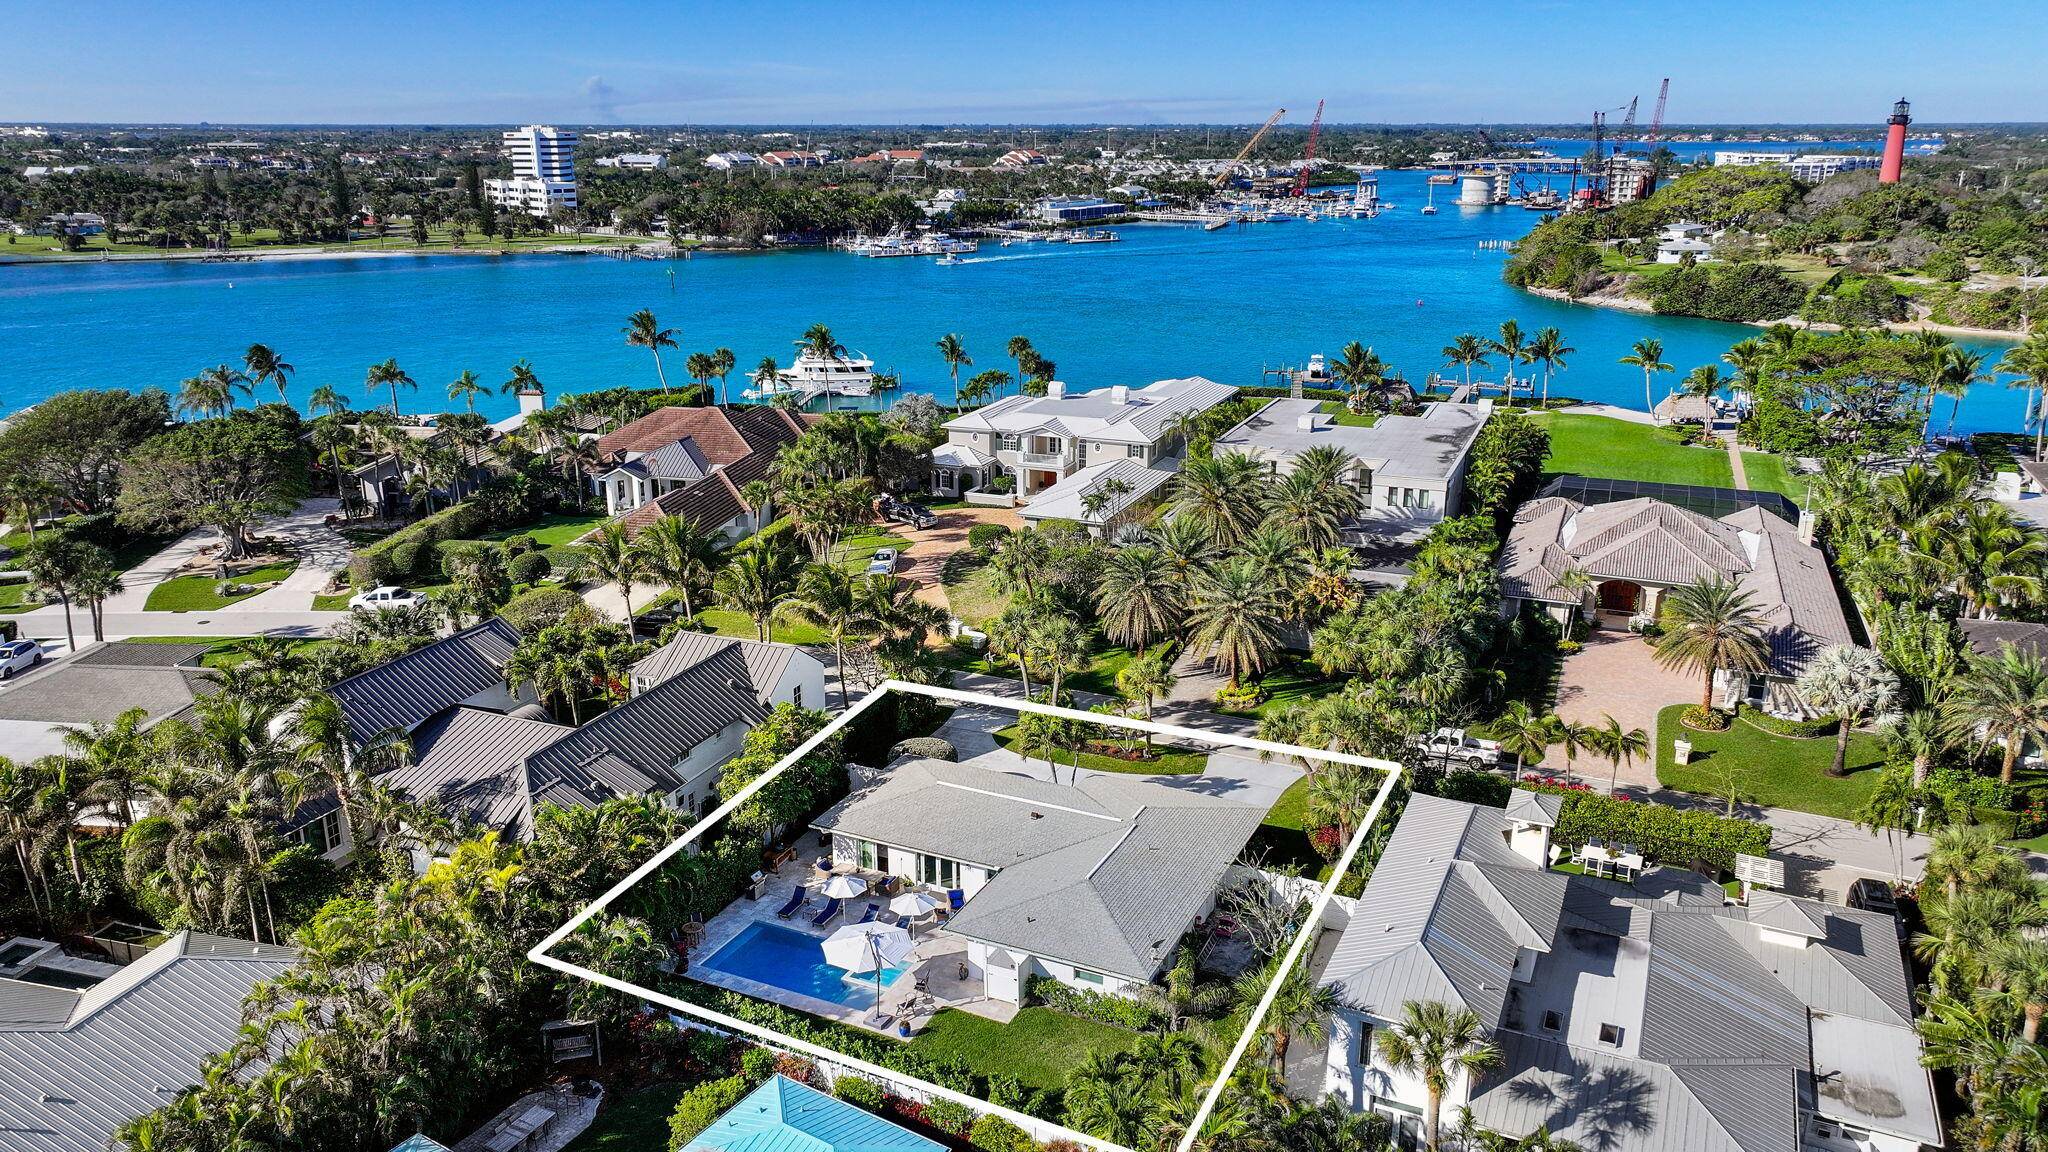 This tastefully renovated 3 bedroom, 2 bathroom beach home in one of the best locations within Jupiter Inlet Colony is meticulously maintained and offers a tranquil beach style living experience.